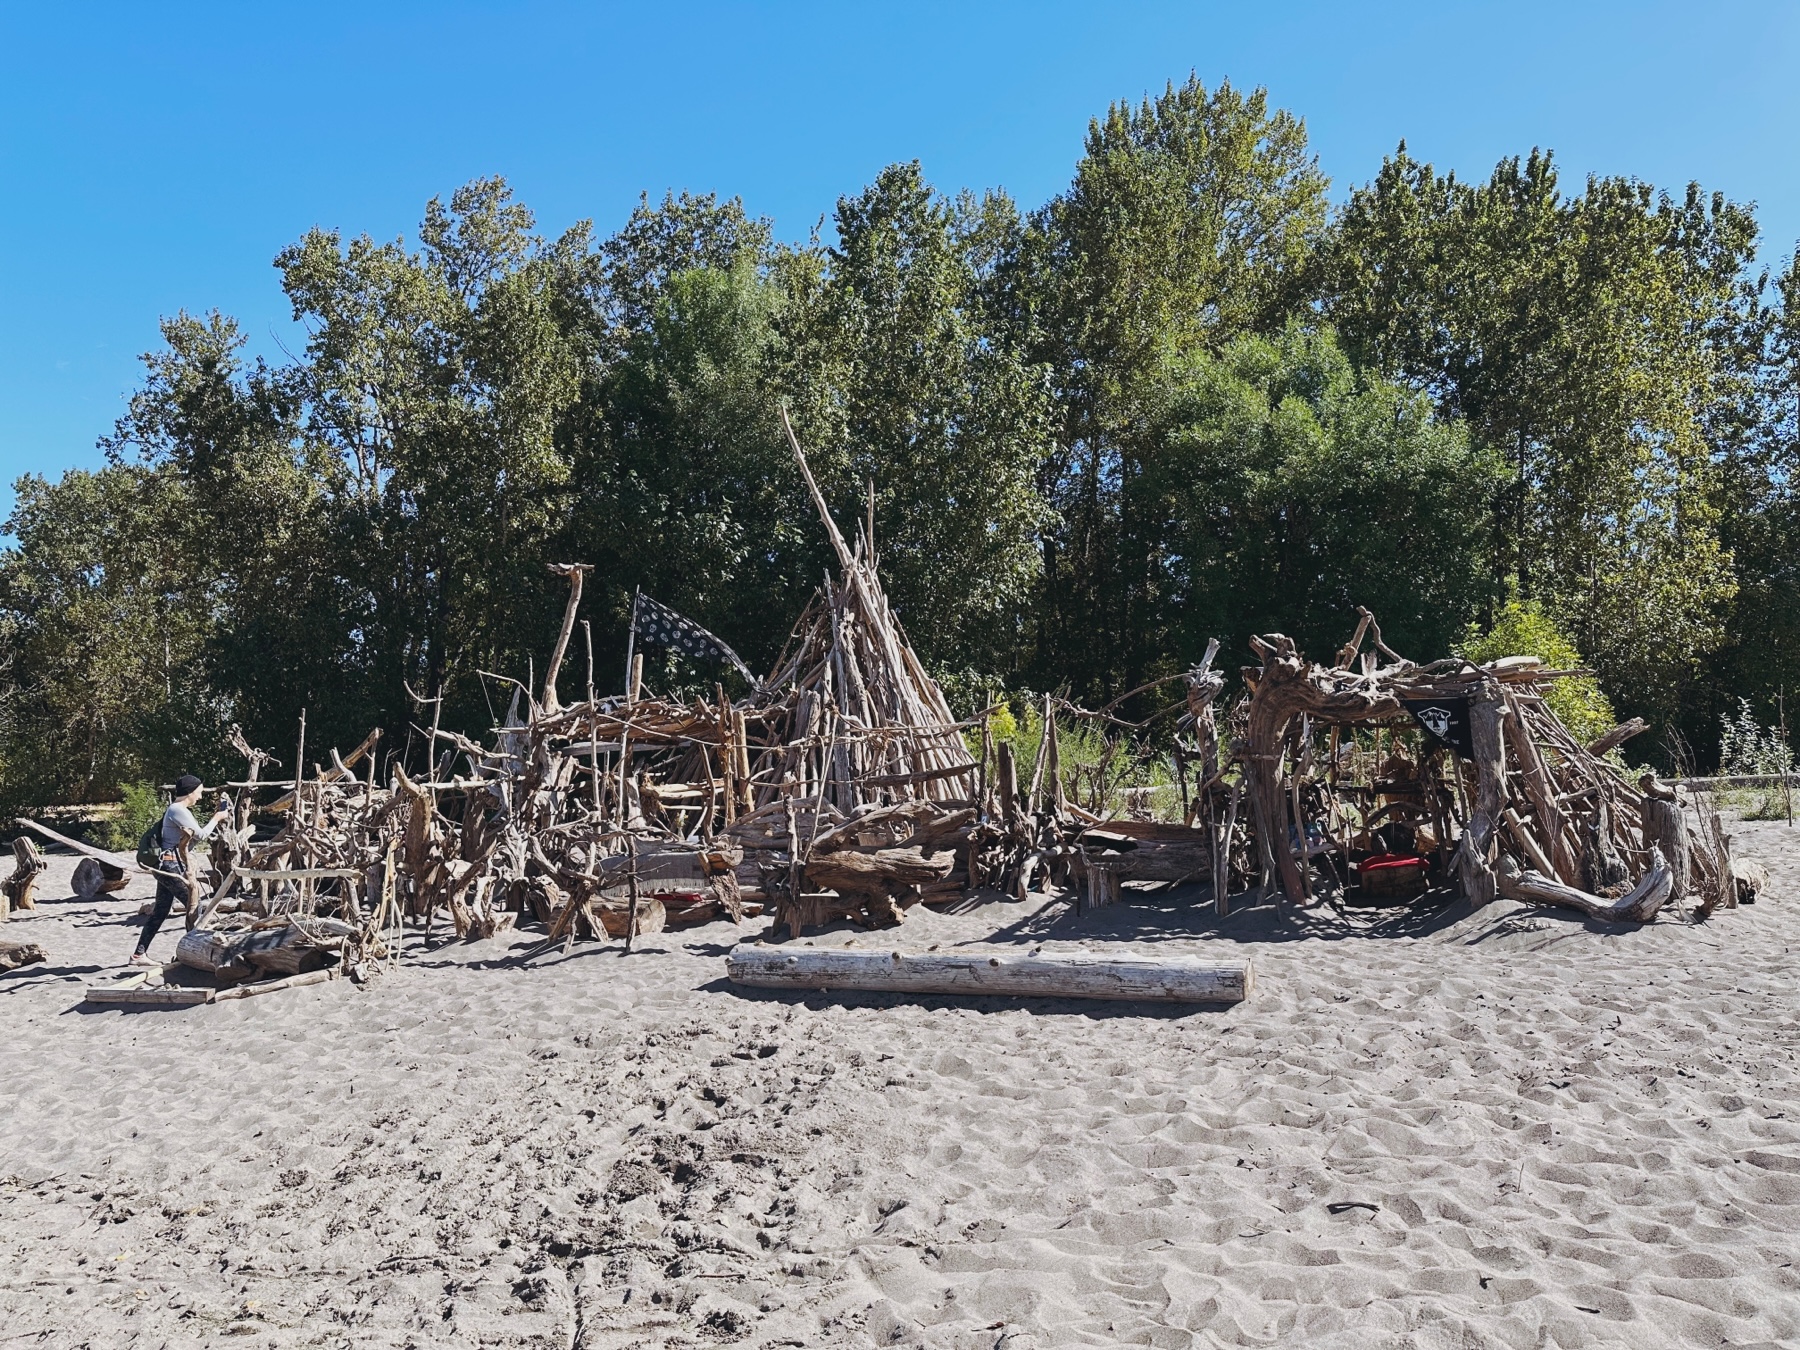 An elaborate fort made of driftwood on the sandy beach with trees behind.